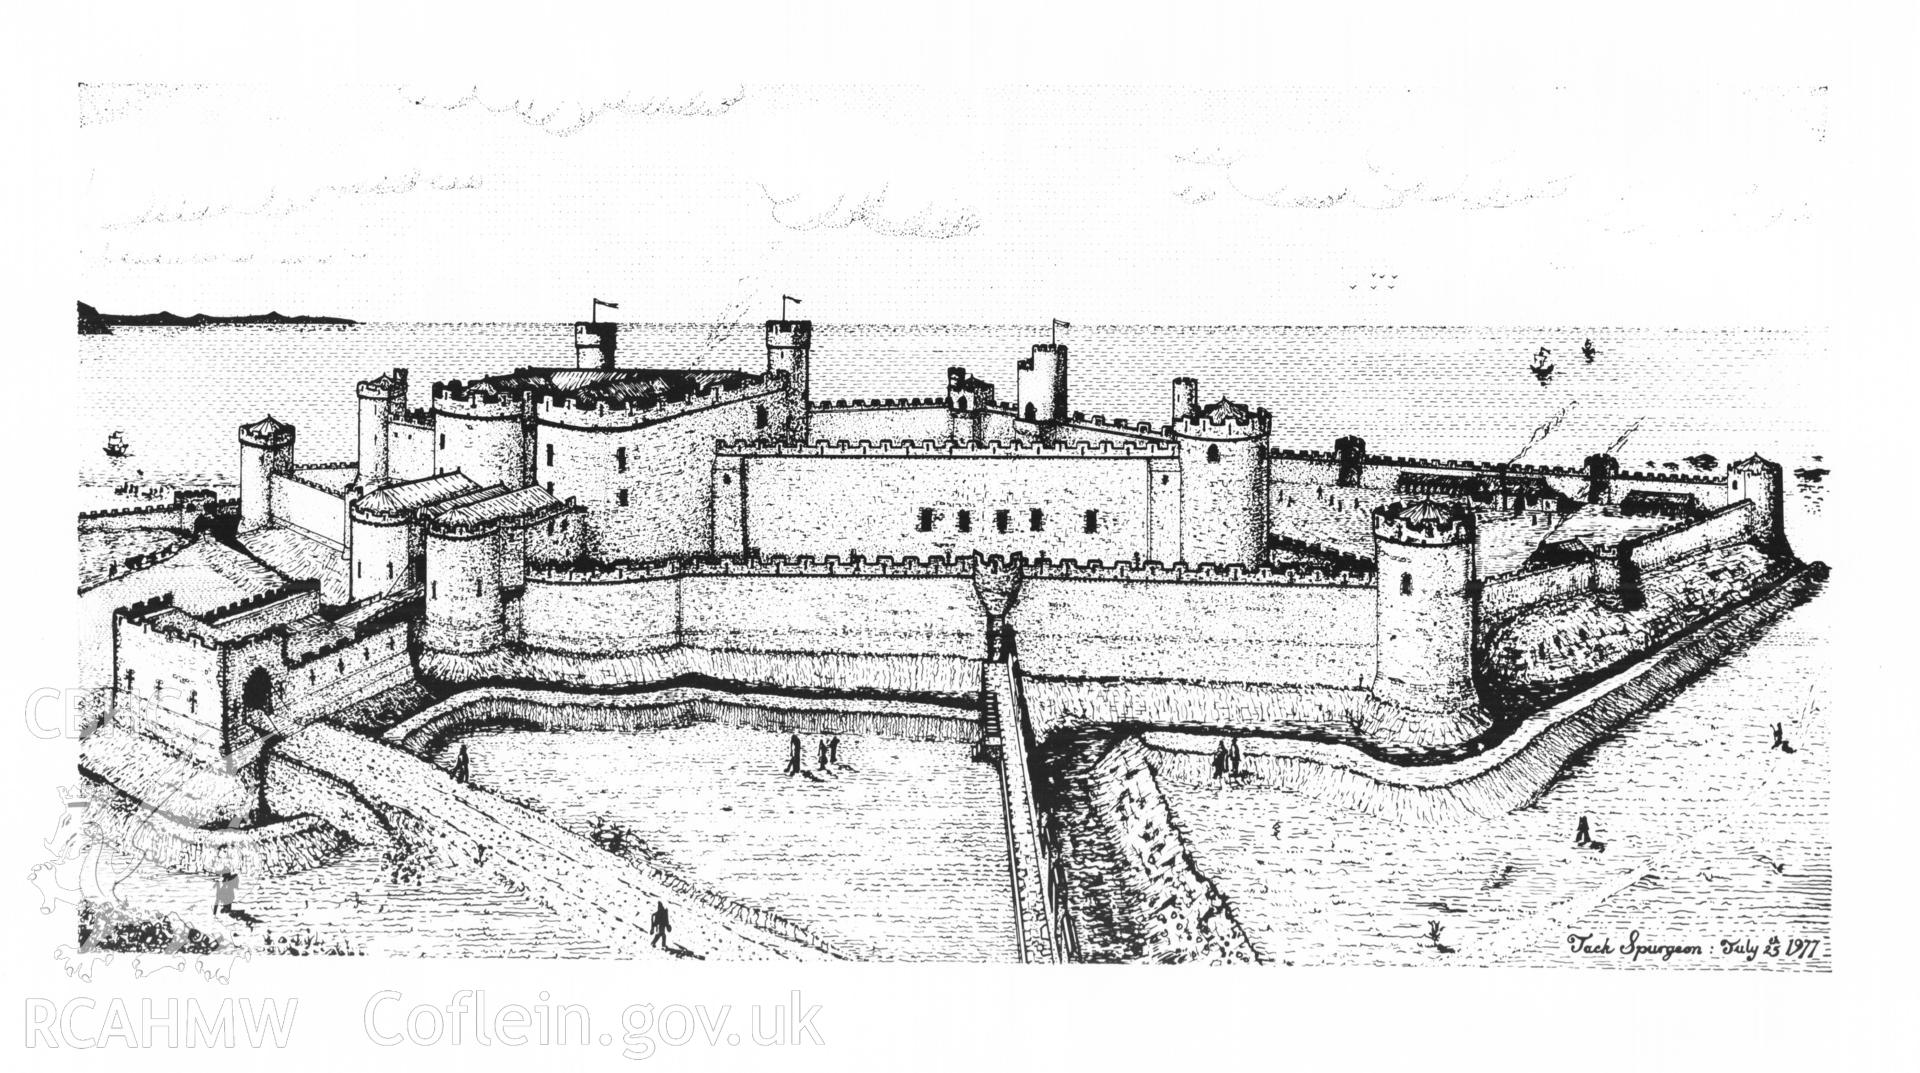 PMT copy of a reconstruction drawing of Aberystwyth Castle, after H. Hughes, 1902. Original in possession of Jack Spurgeon.